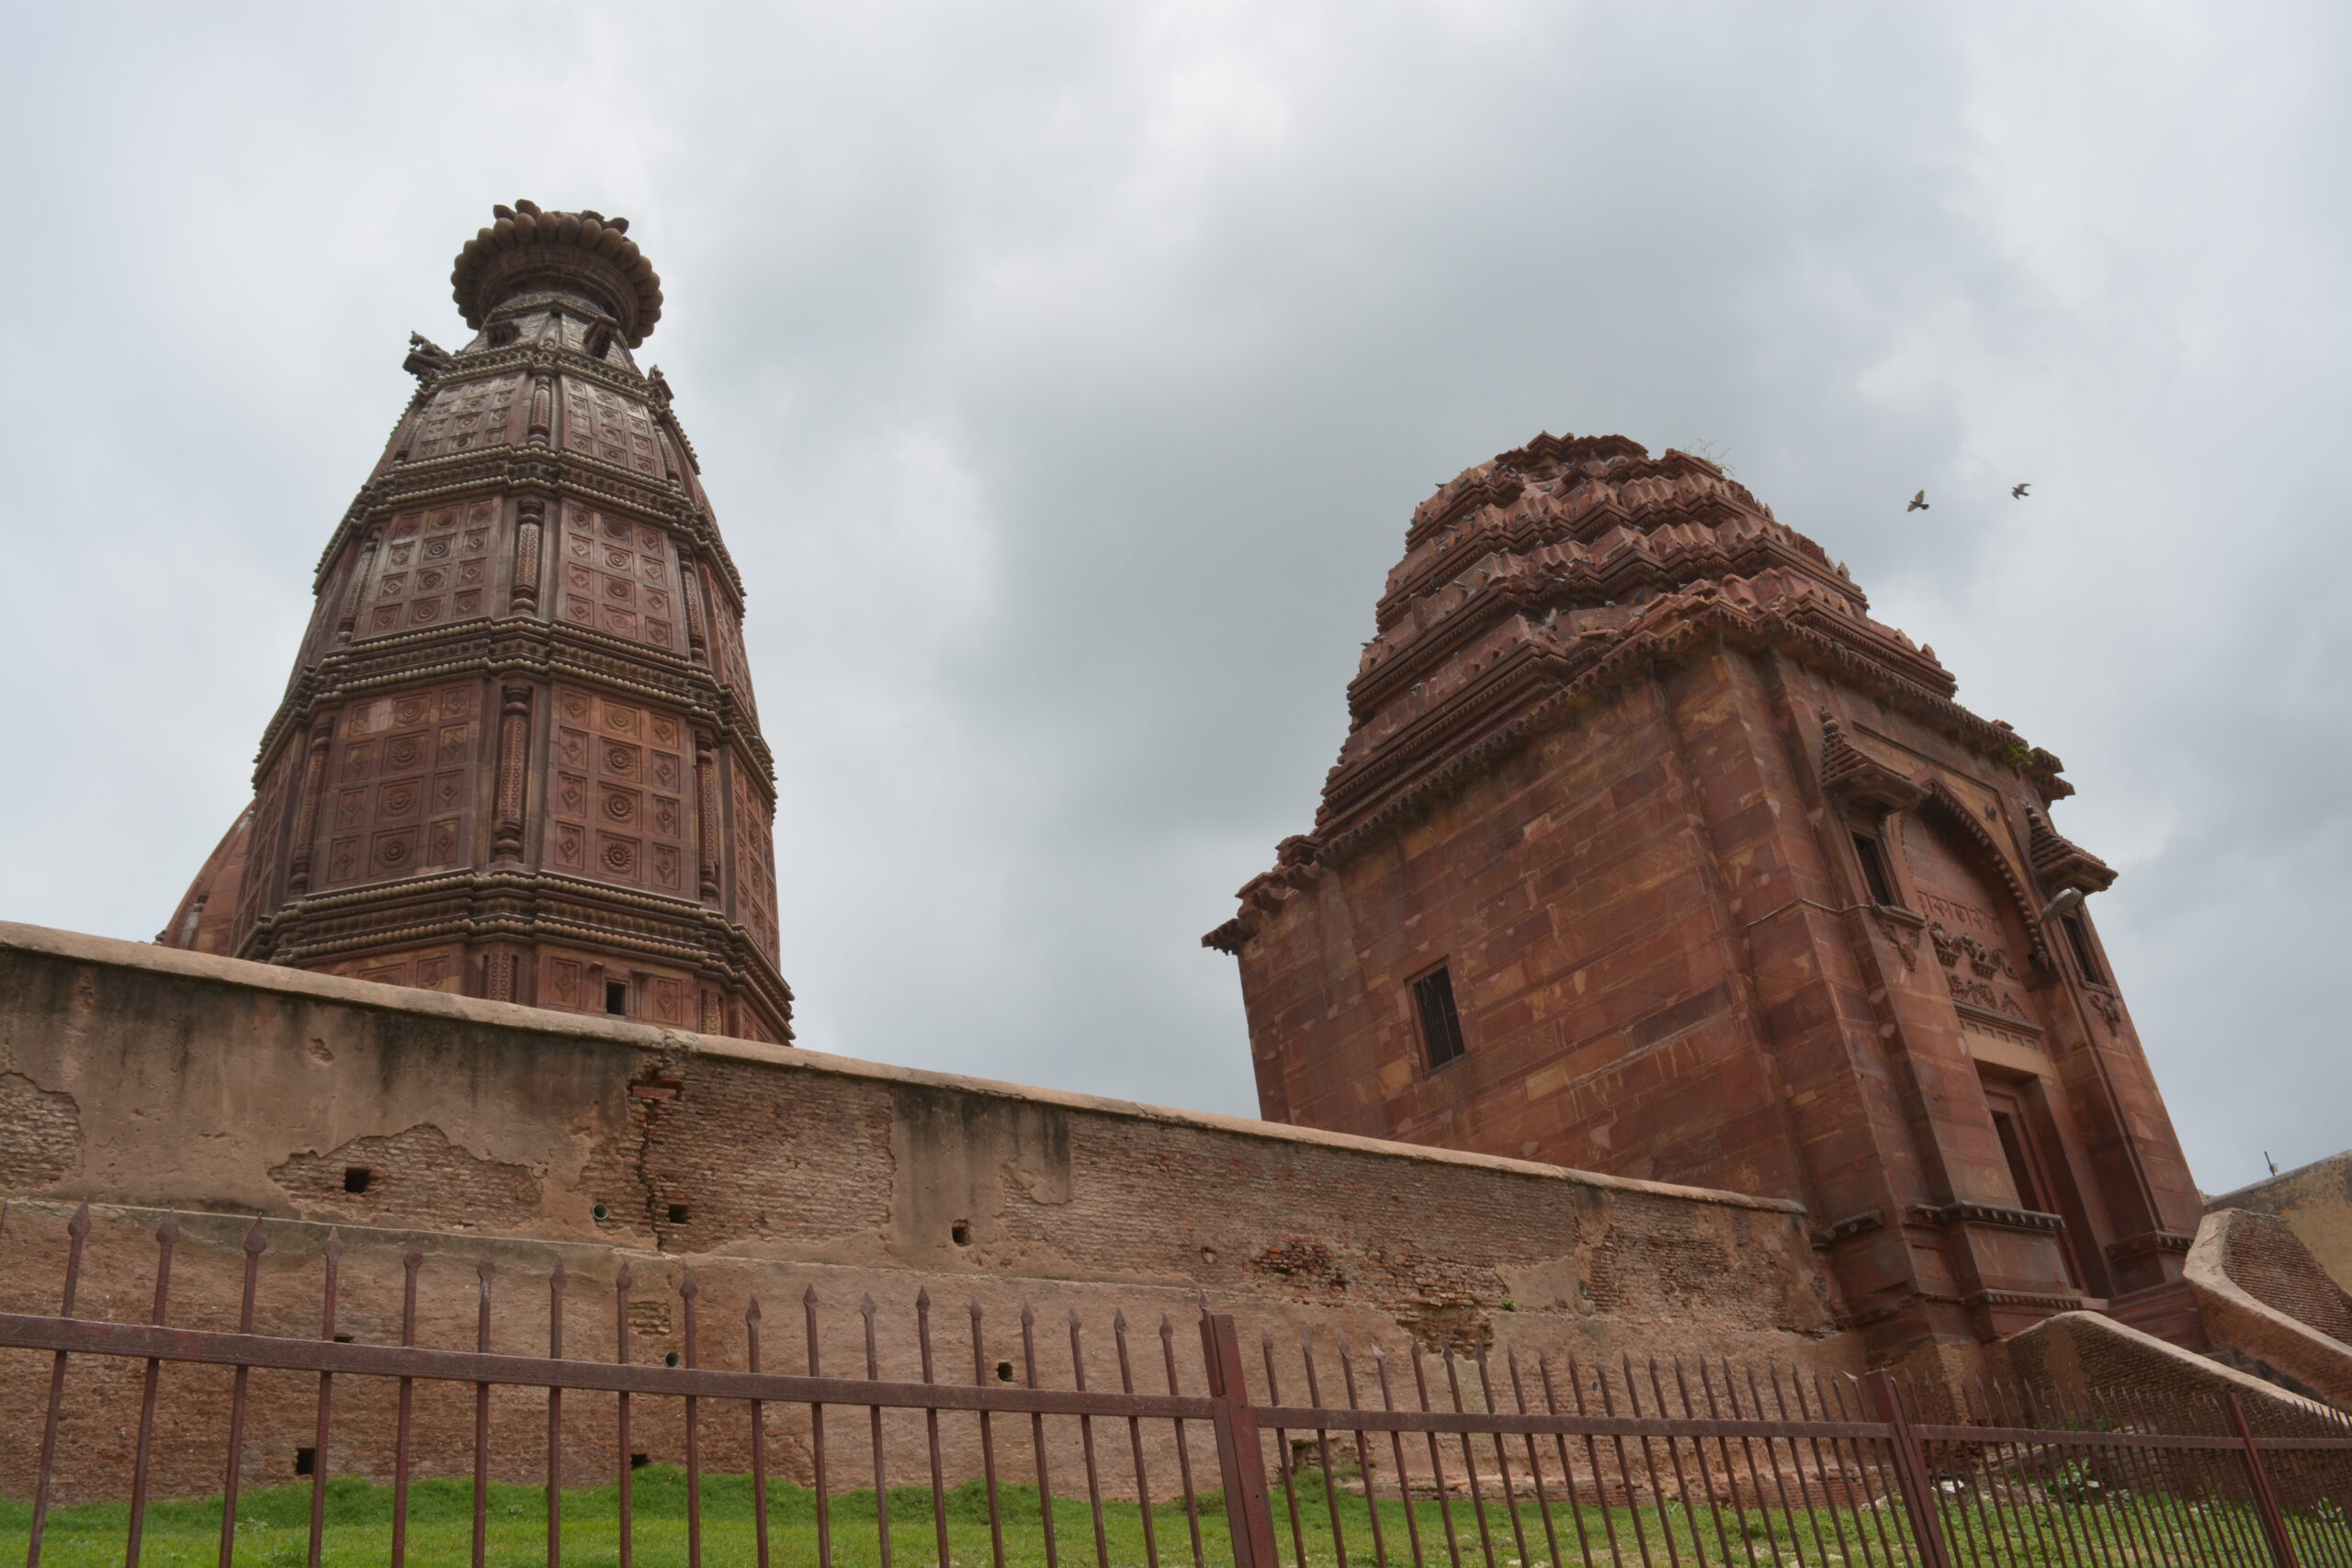 ASI to carry out conservation work at Madan Mohan Temple